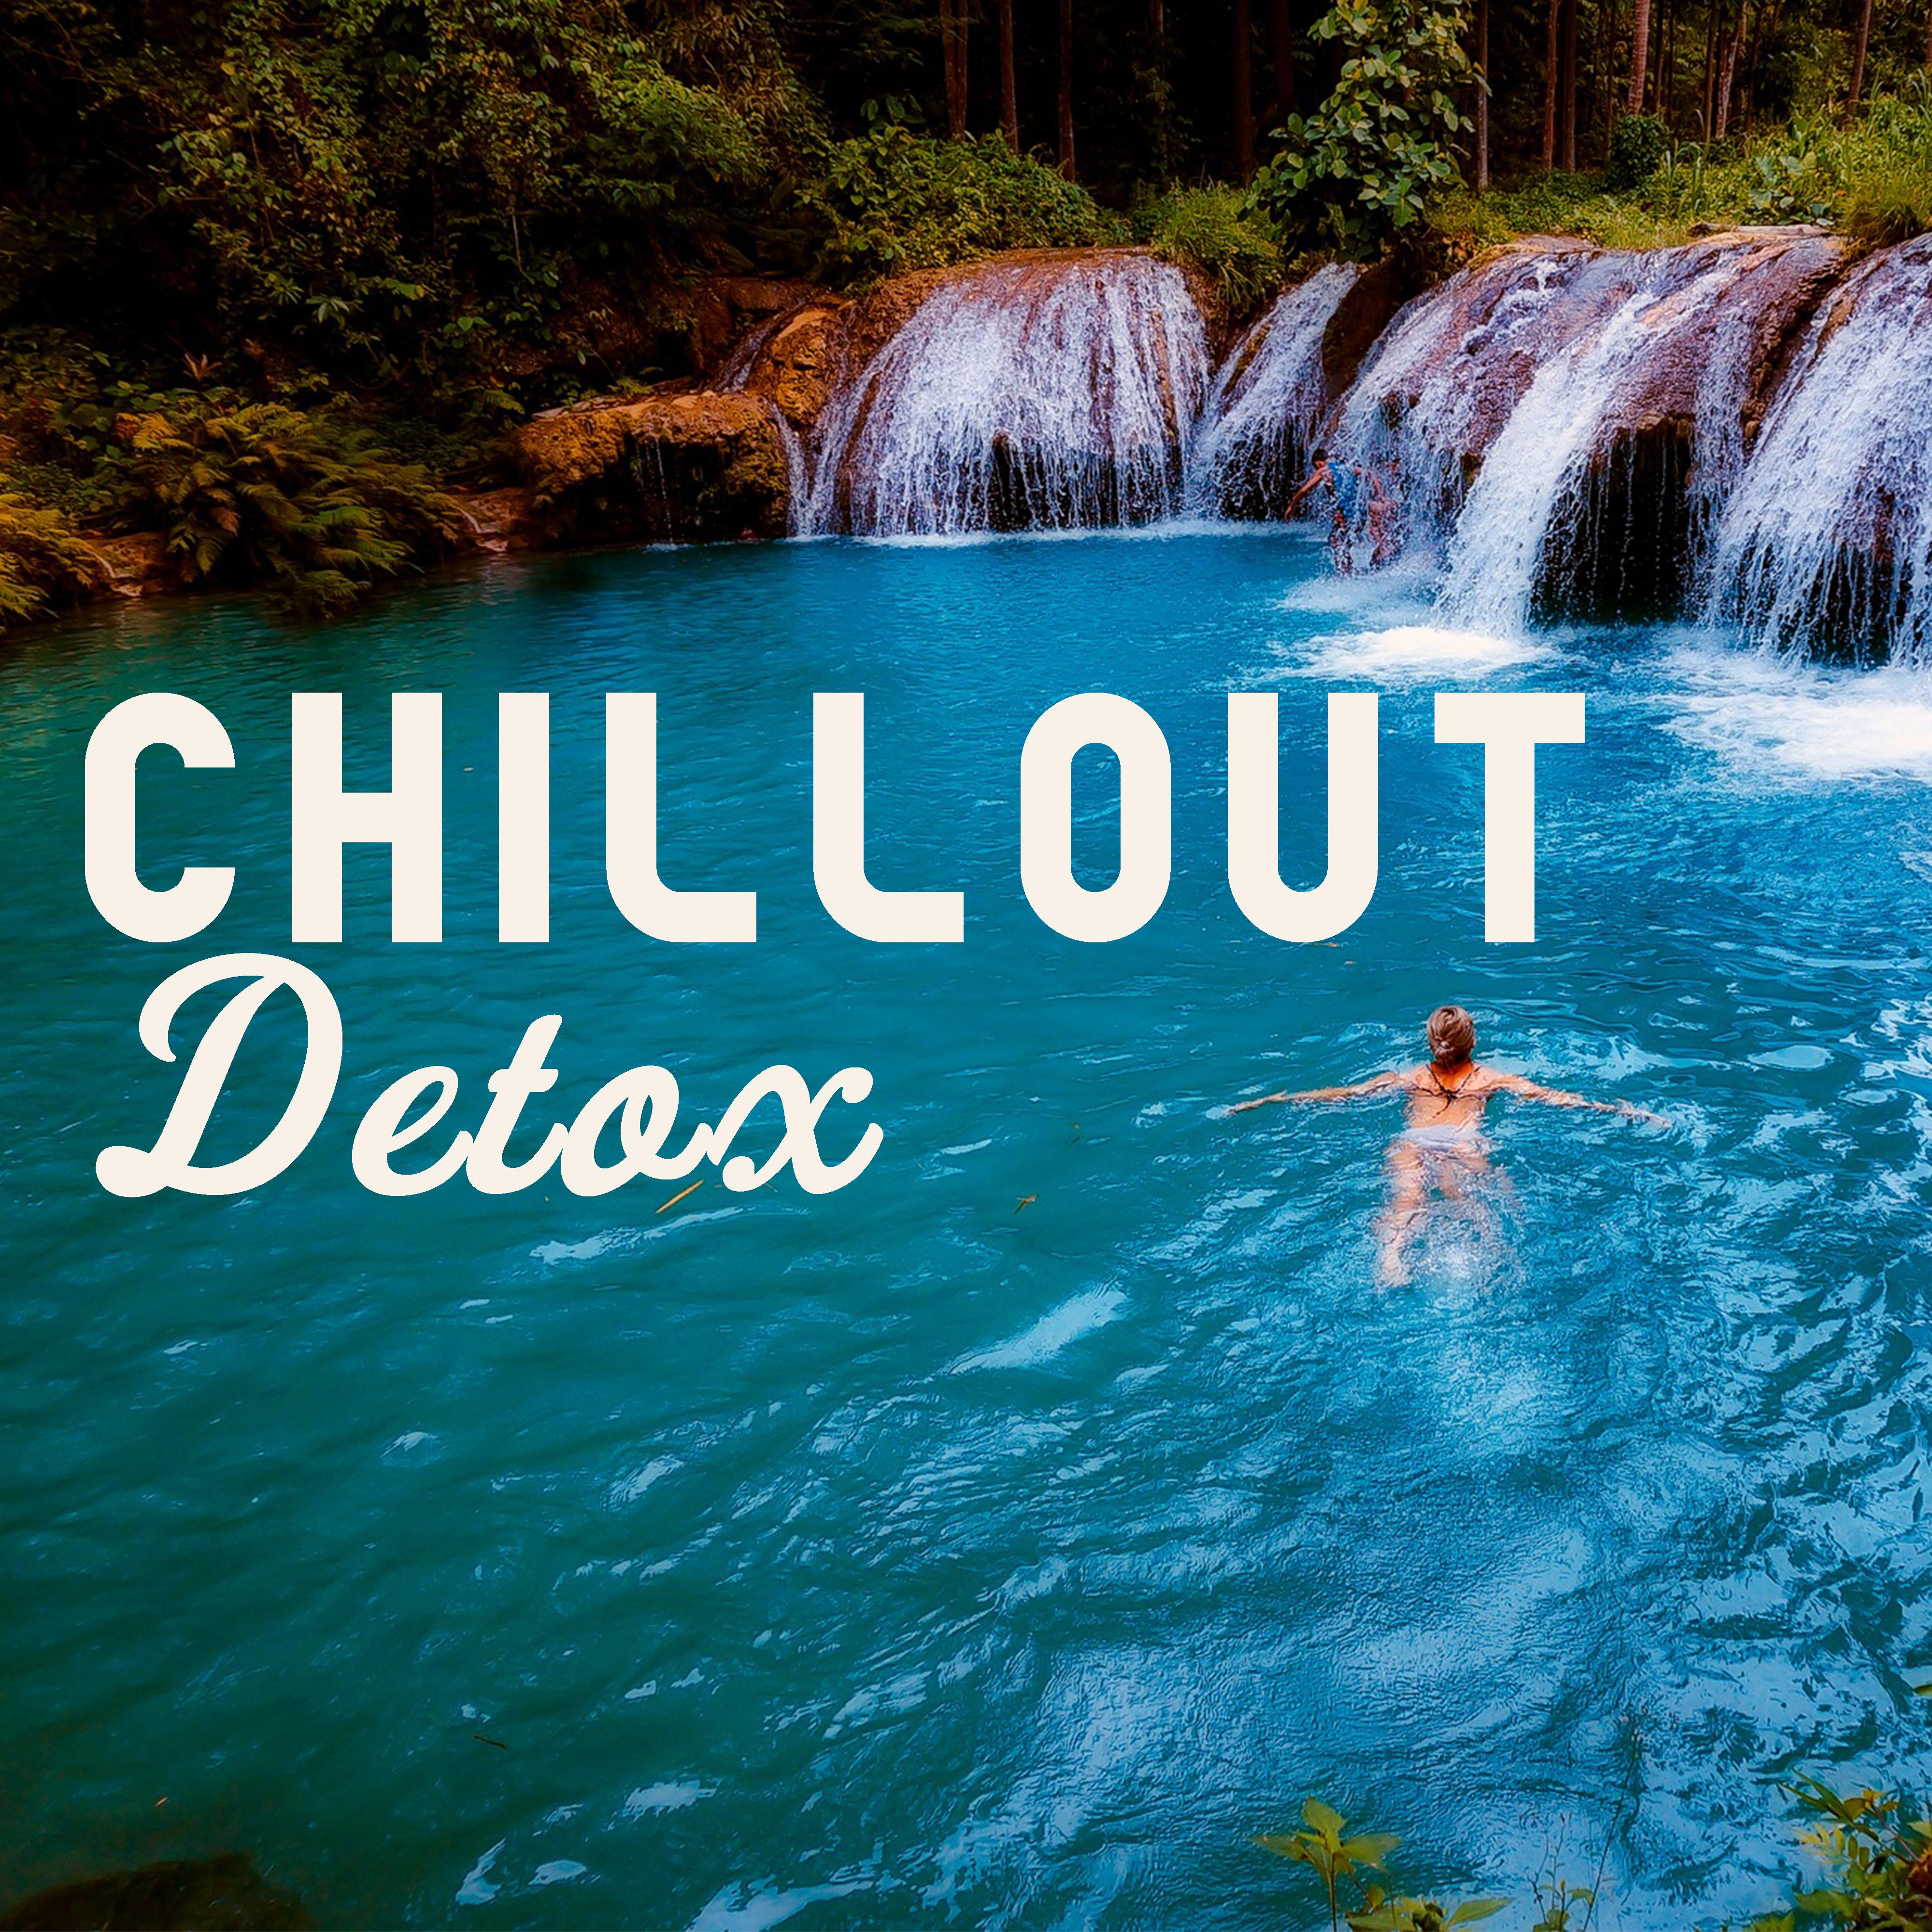 Chillout Detox – Total Relaxation, Chill Out 2017, Selected Music, Rest, Zen